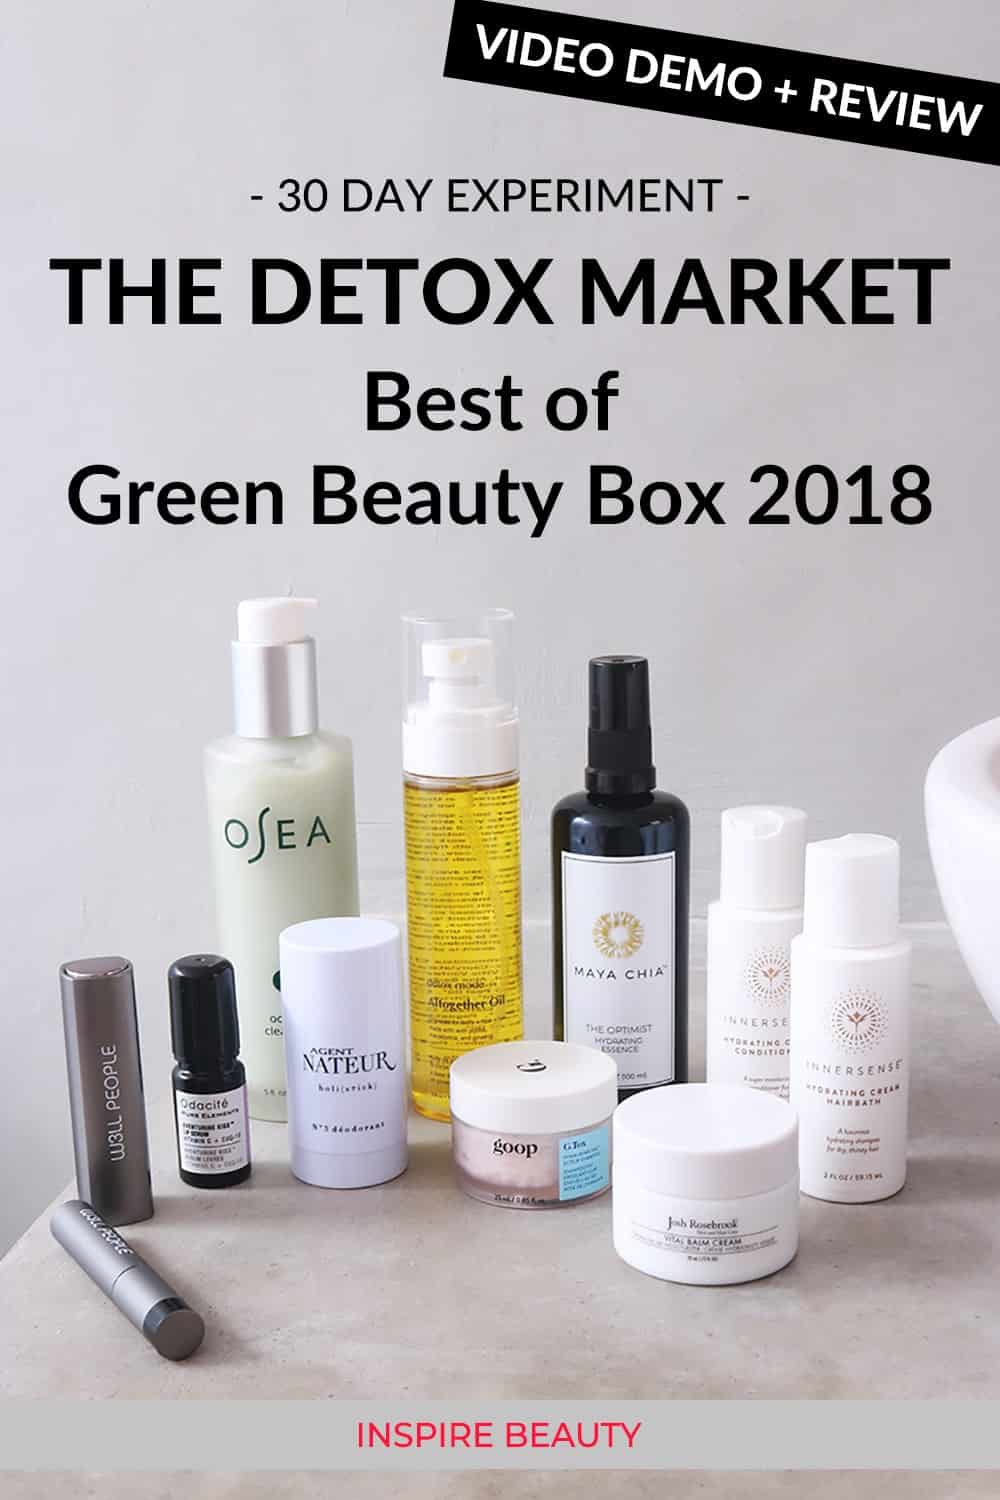 Review of The Detox Market Best Of Green Beauty Box 2018, clean beauty, organic skincare, natural beauty products